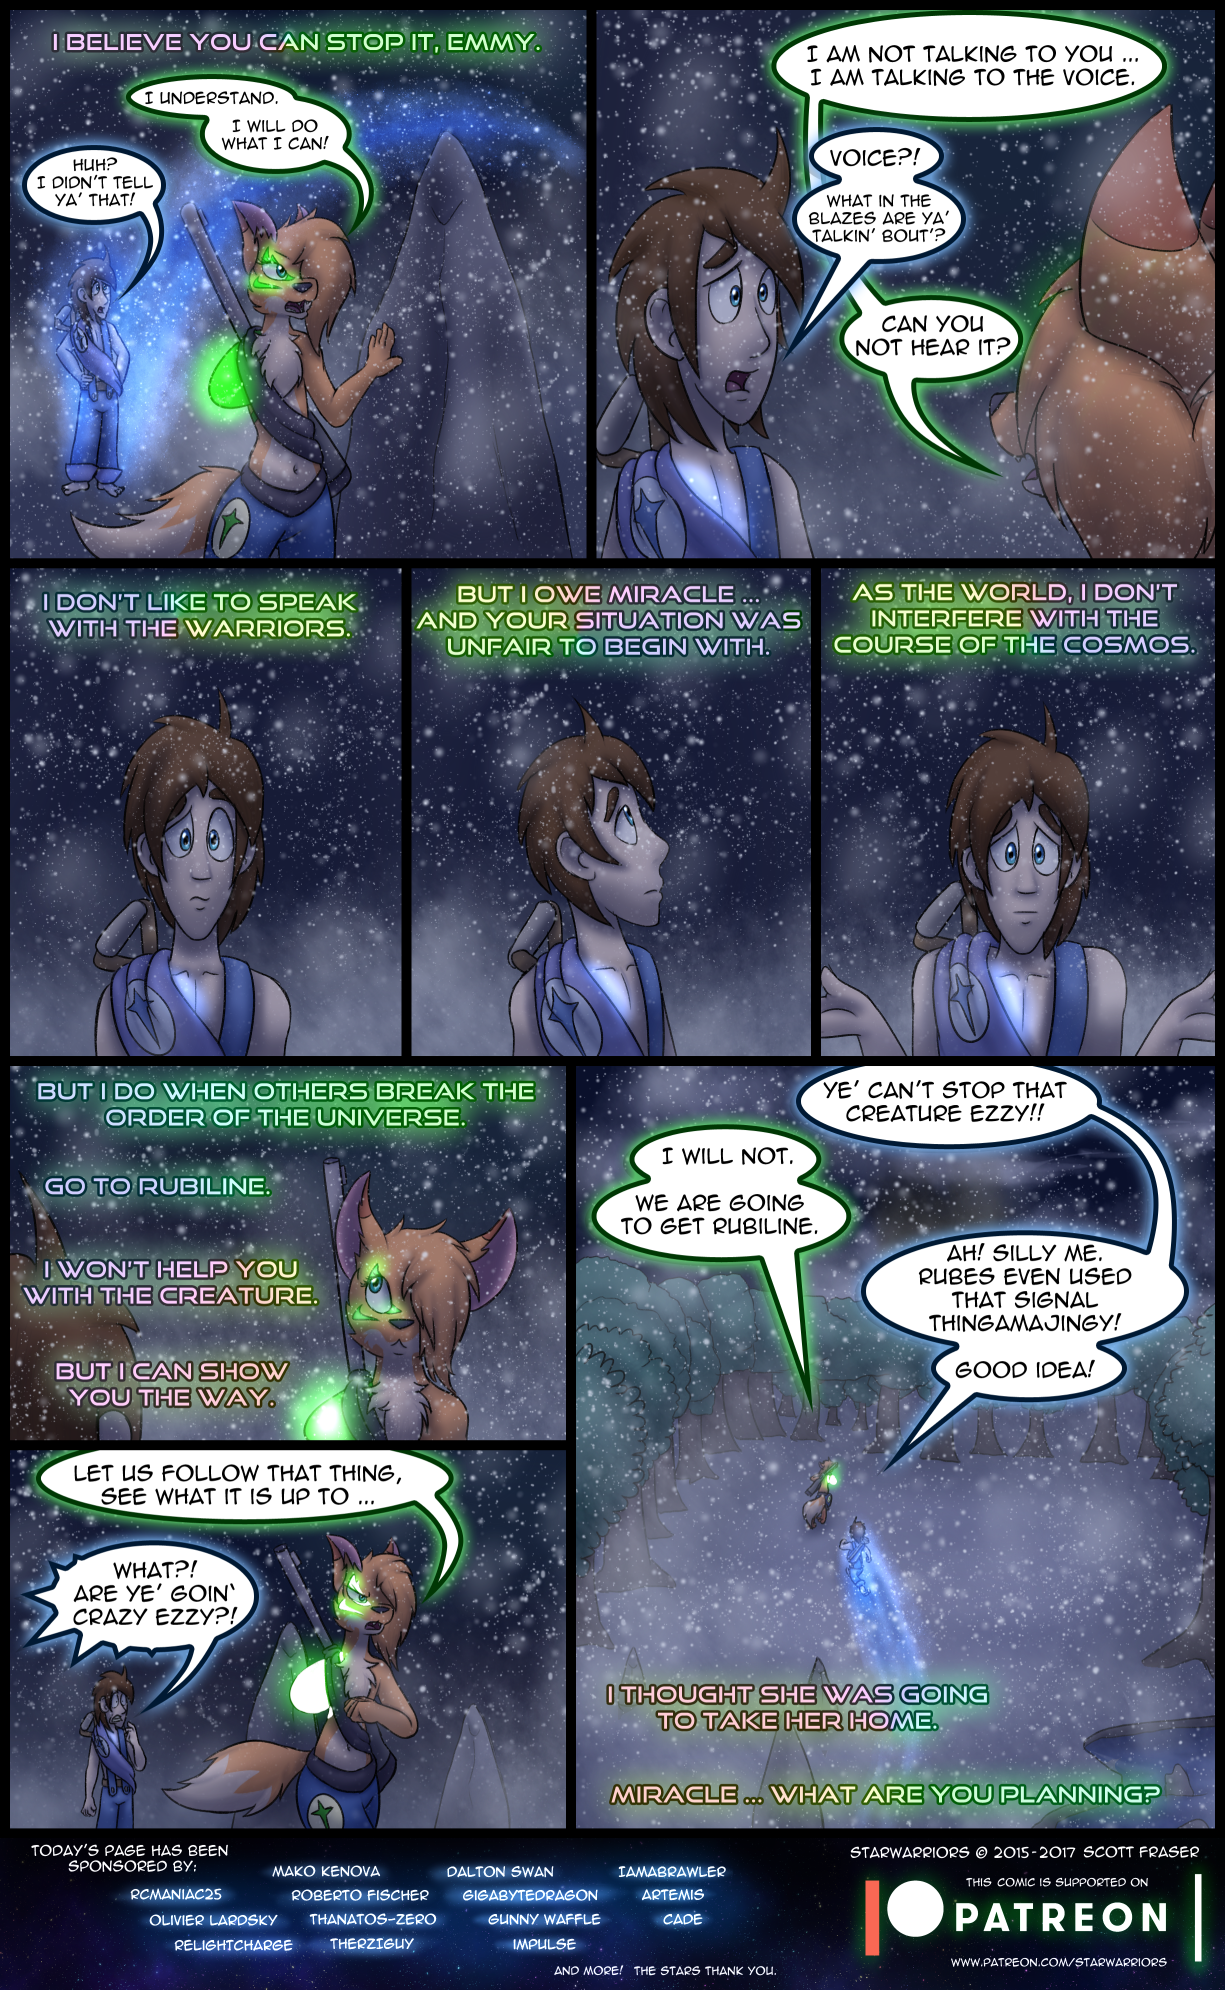 Ch3 Page 18 – You Can Stop It